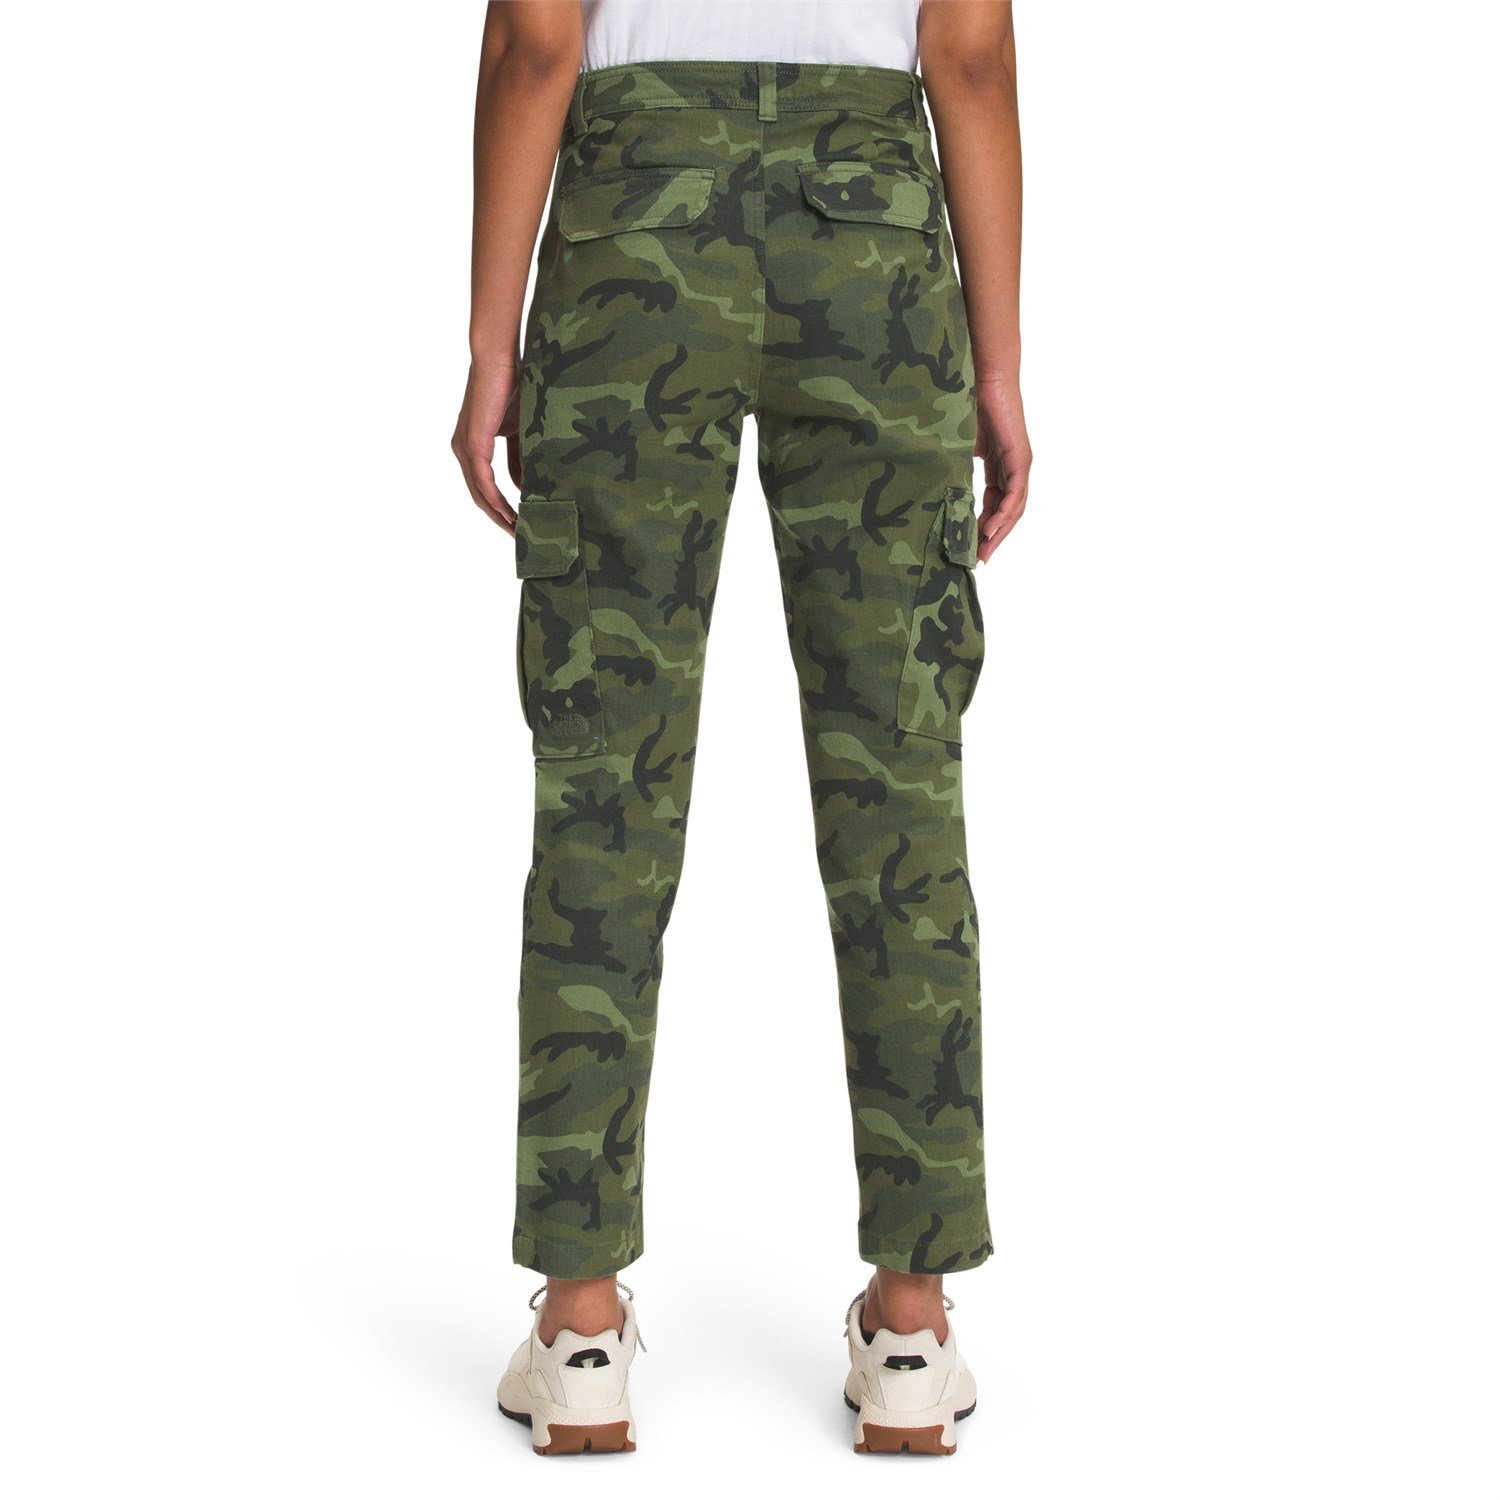 Army Print Cargo Pants Online - tundraecology.hi.is 1694313797